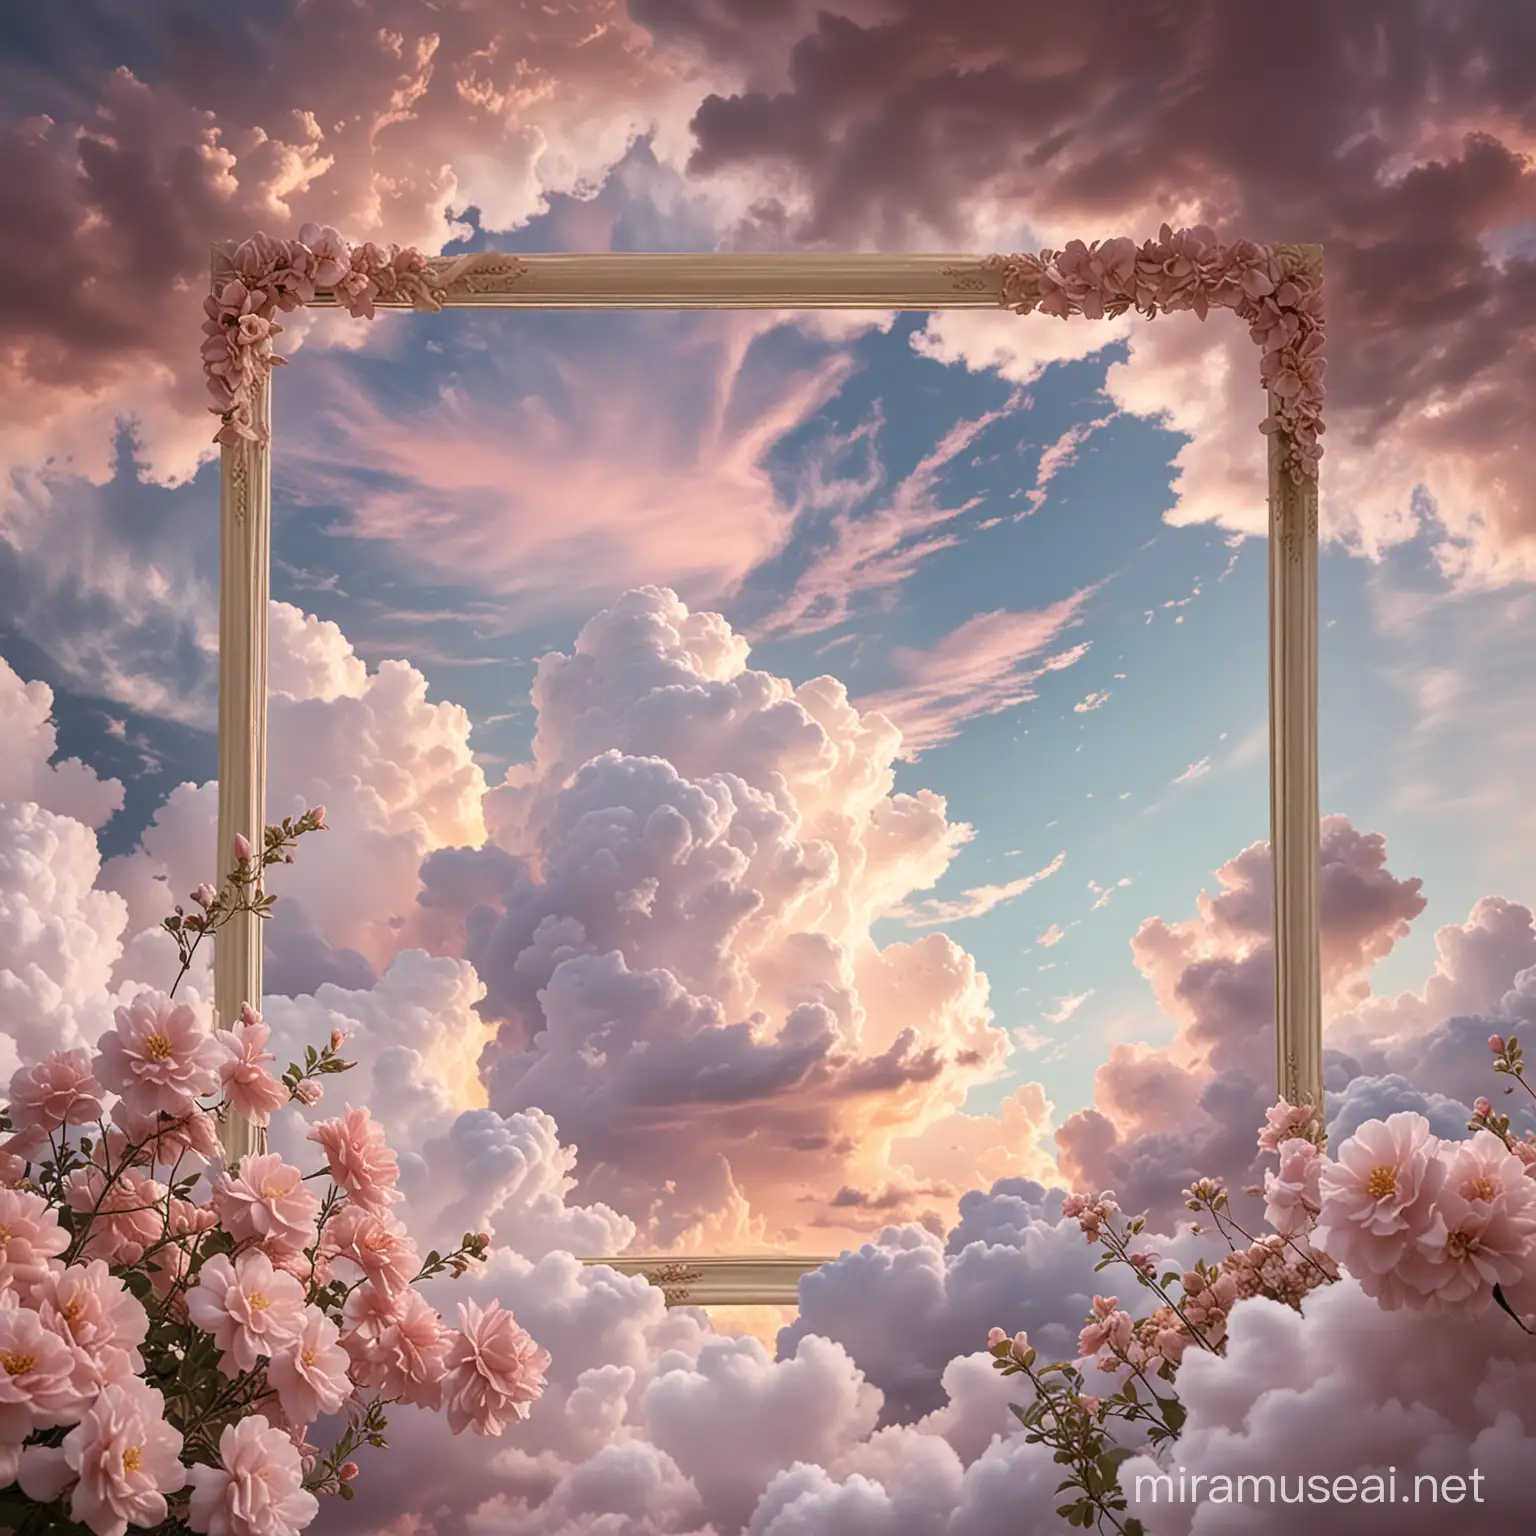 Tranquil Pastel Clouds with Floating Flowers